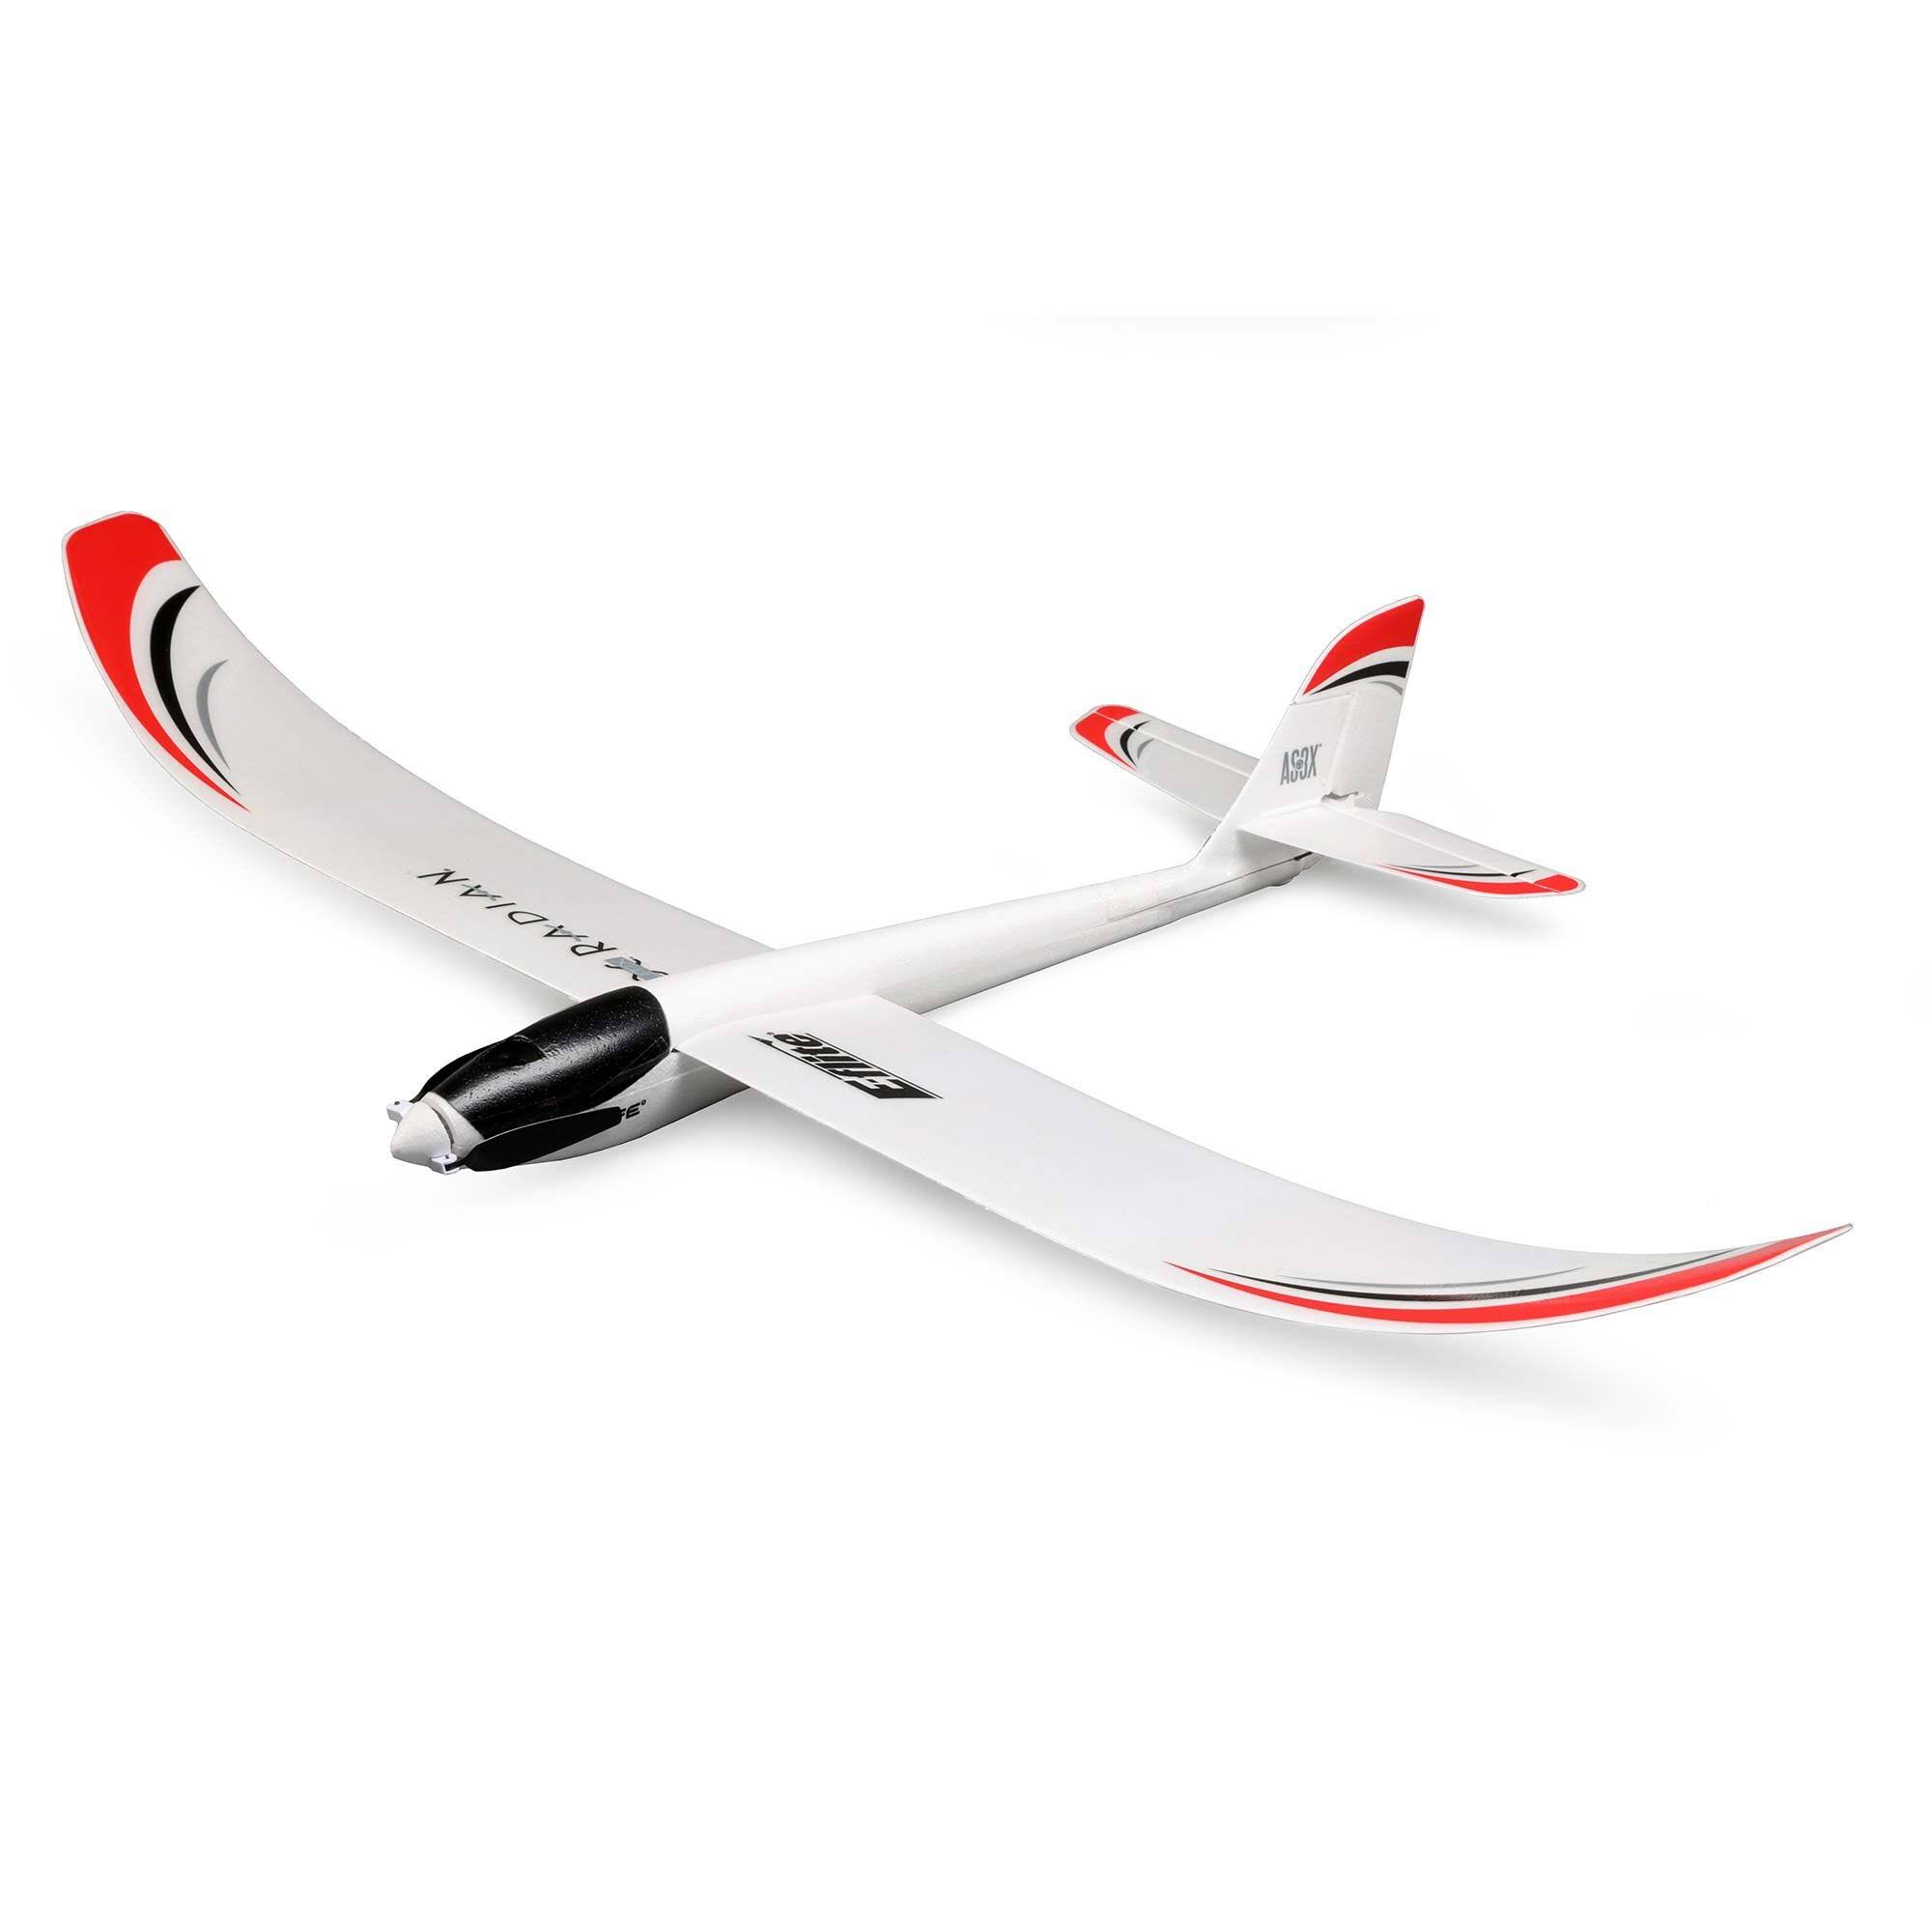 E-flite Glider UMX Radian BNF Basic with SAFE and AS3X / EFLU2950